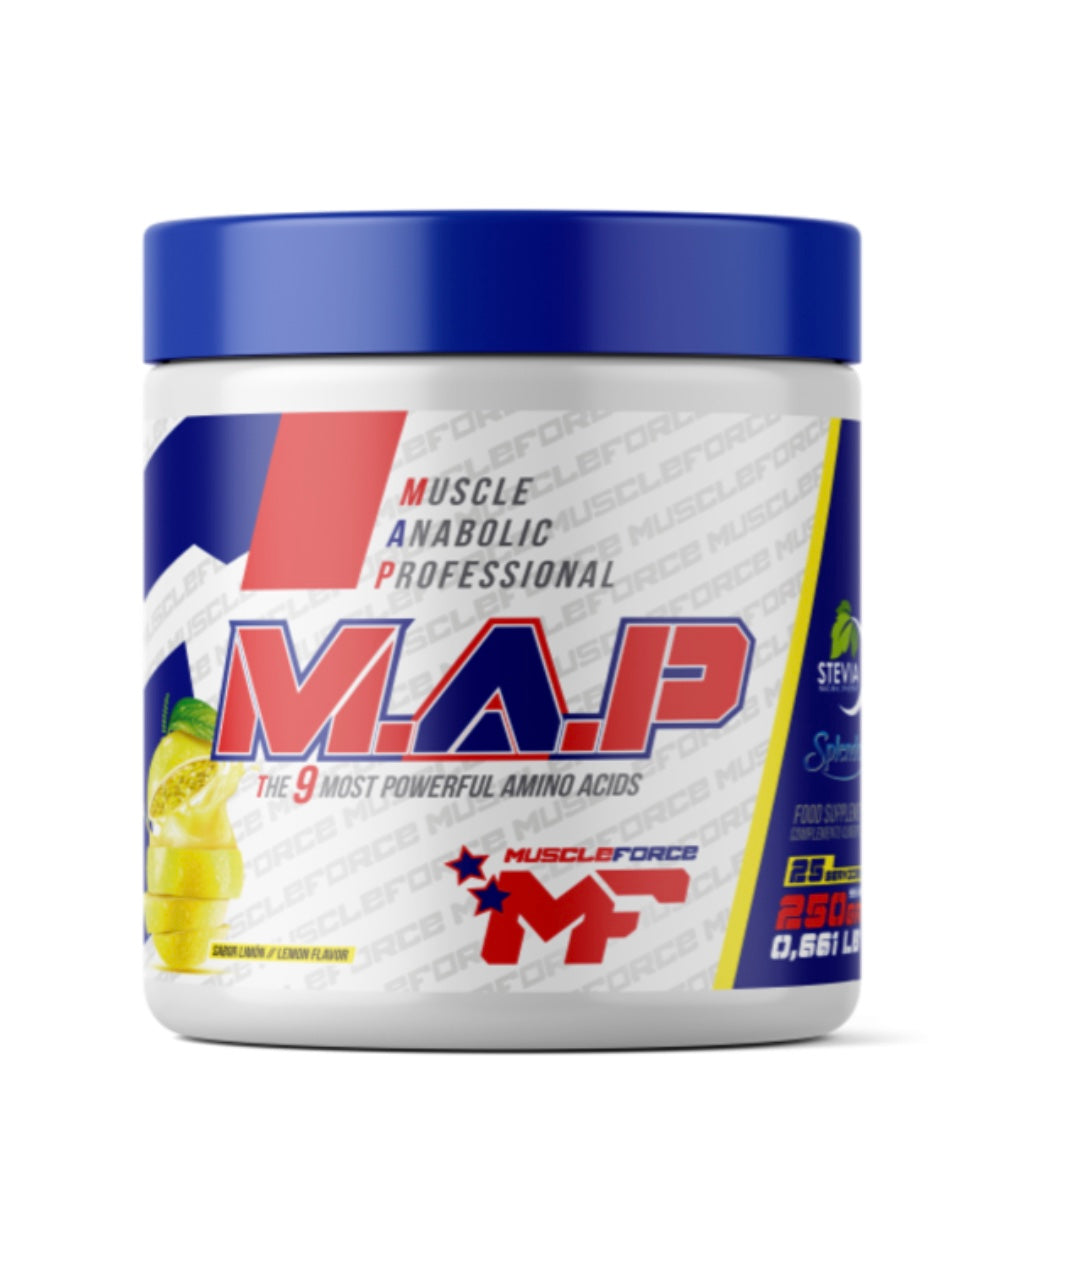 Muscle Force MAP Muscle Anabolic Professional 250G